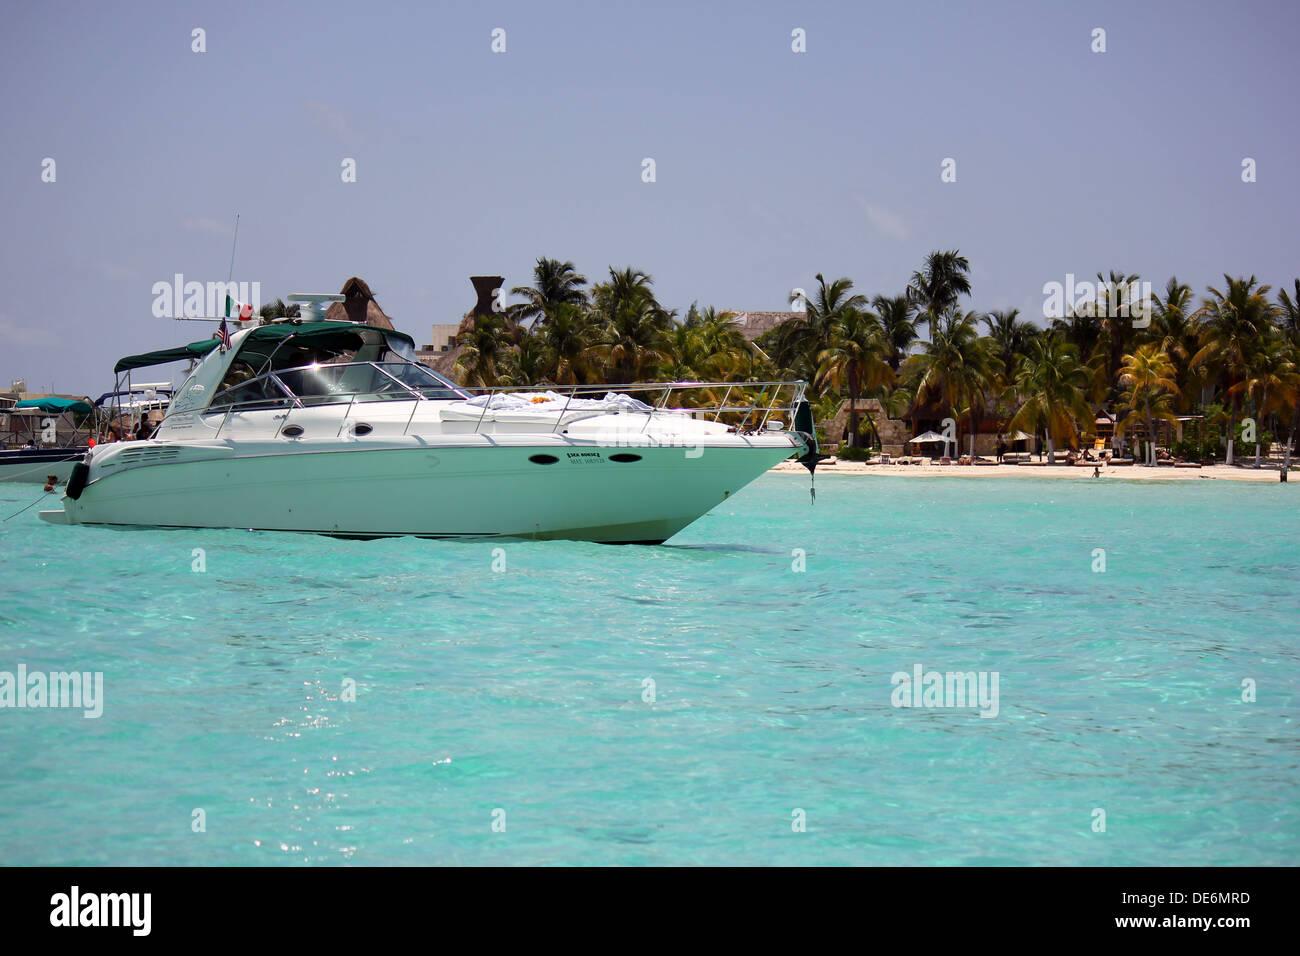 Yacht on crystal waters in Isla mujeres Stock Photo